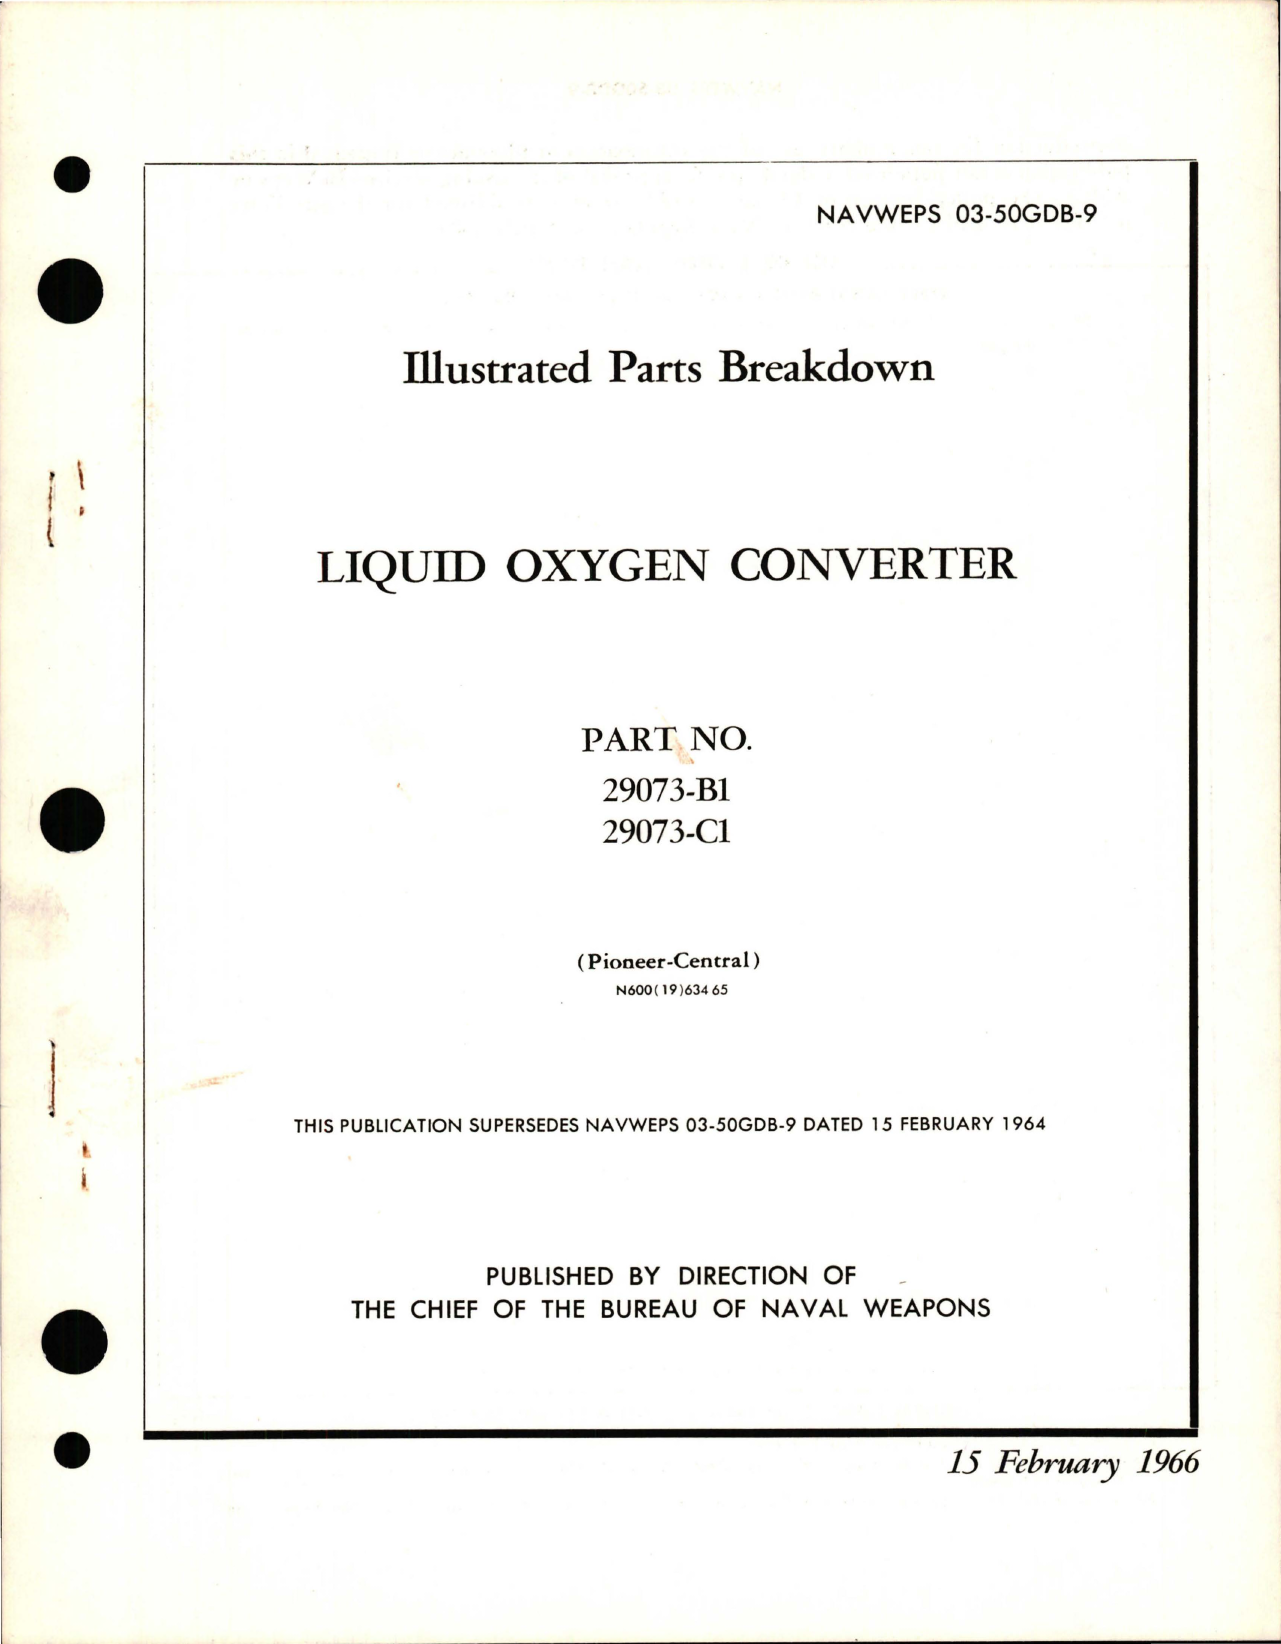 Sample page 1 from AirCorps Library document: Illustrated Parts Breakdown for Liquid Oxygen Converter - Parts 29073-B1 and 29073-C1